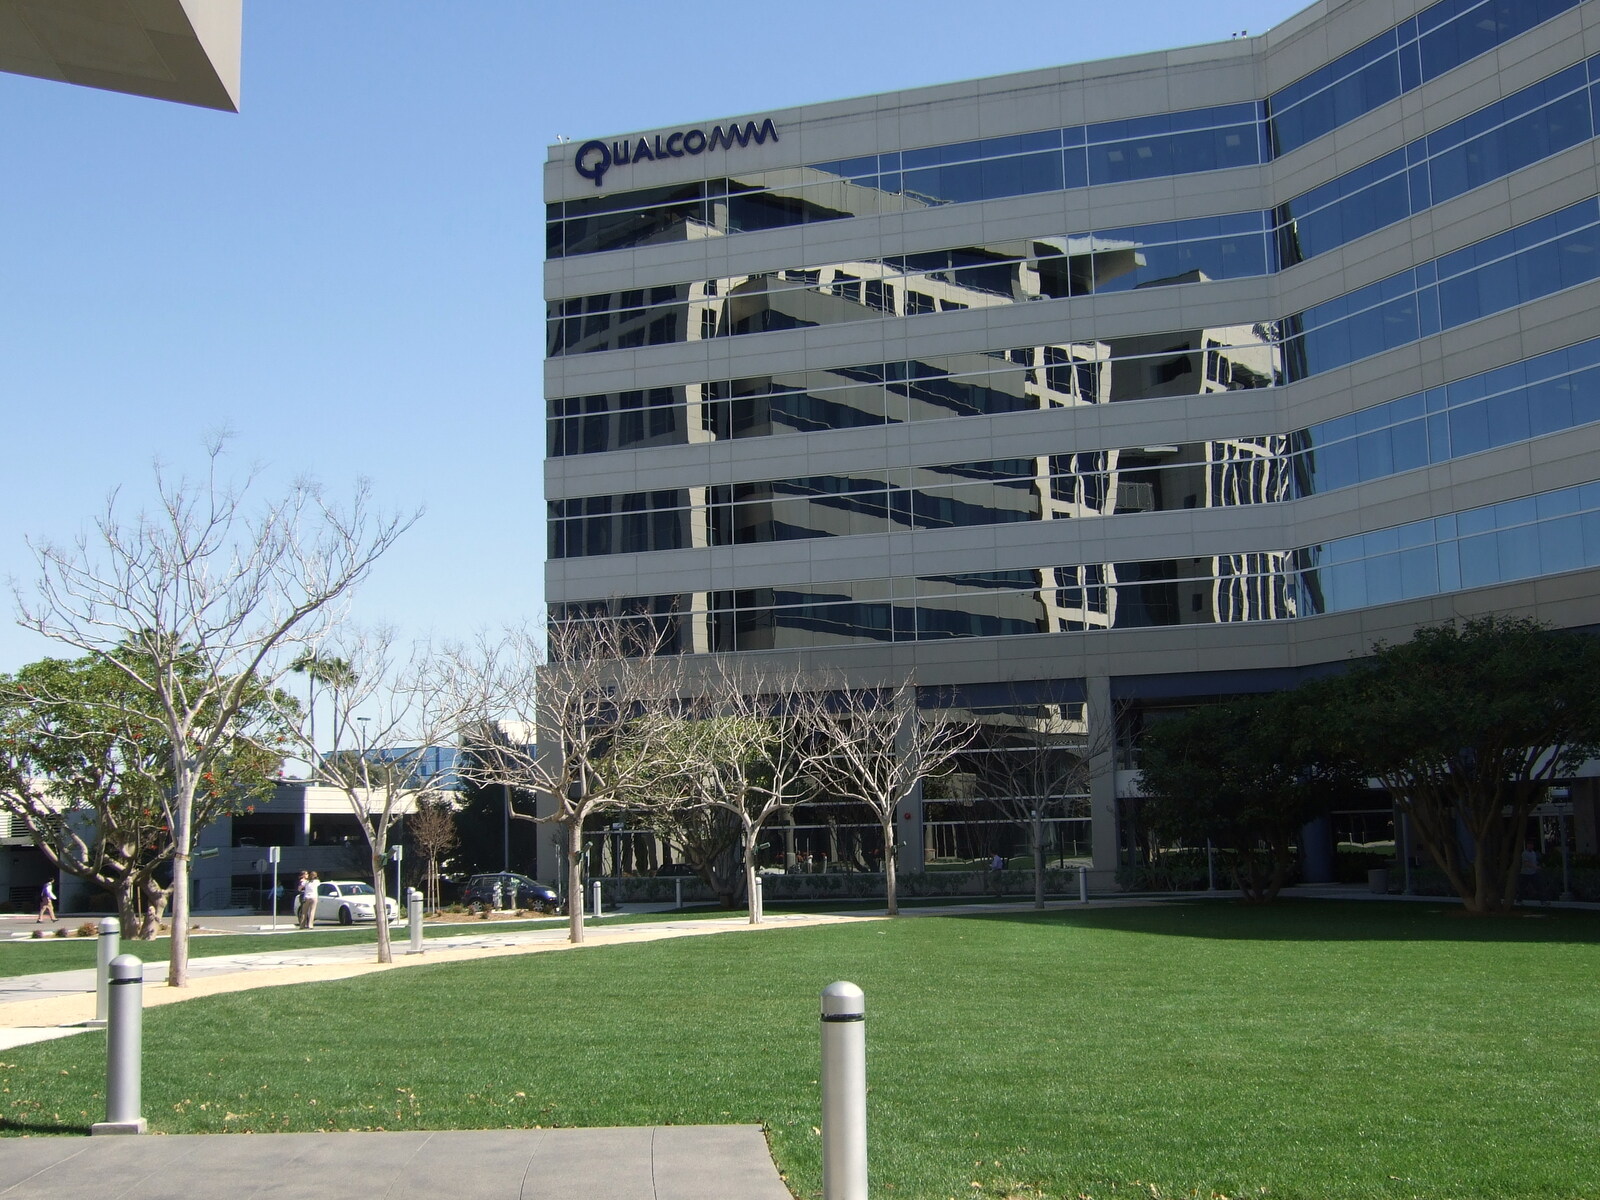 San Diego and Hollywood, California, US - 3rd March 2008: Qualcomm buildings